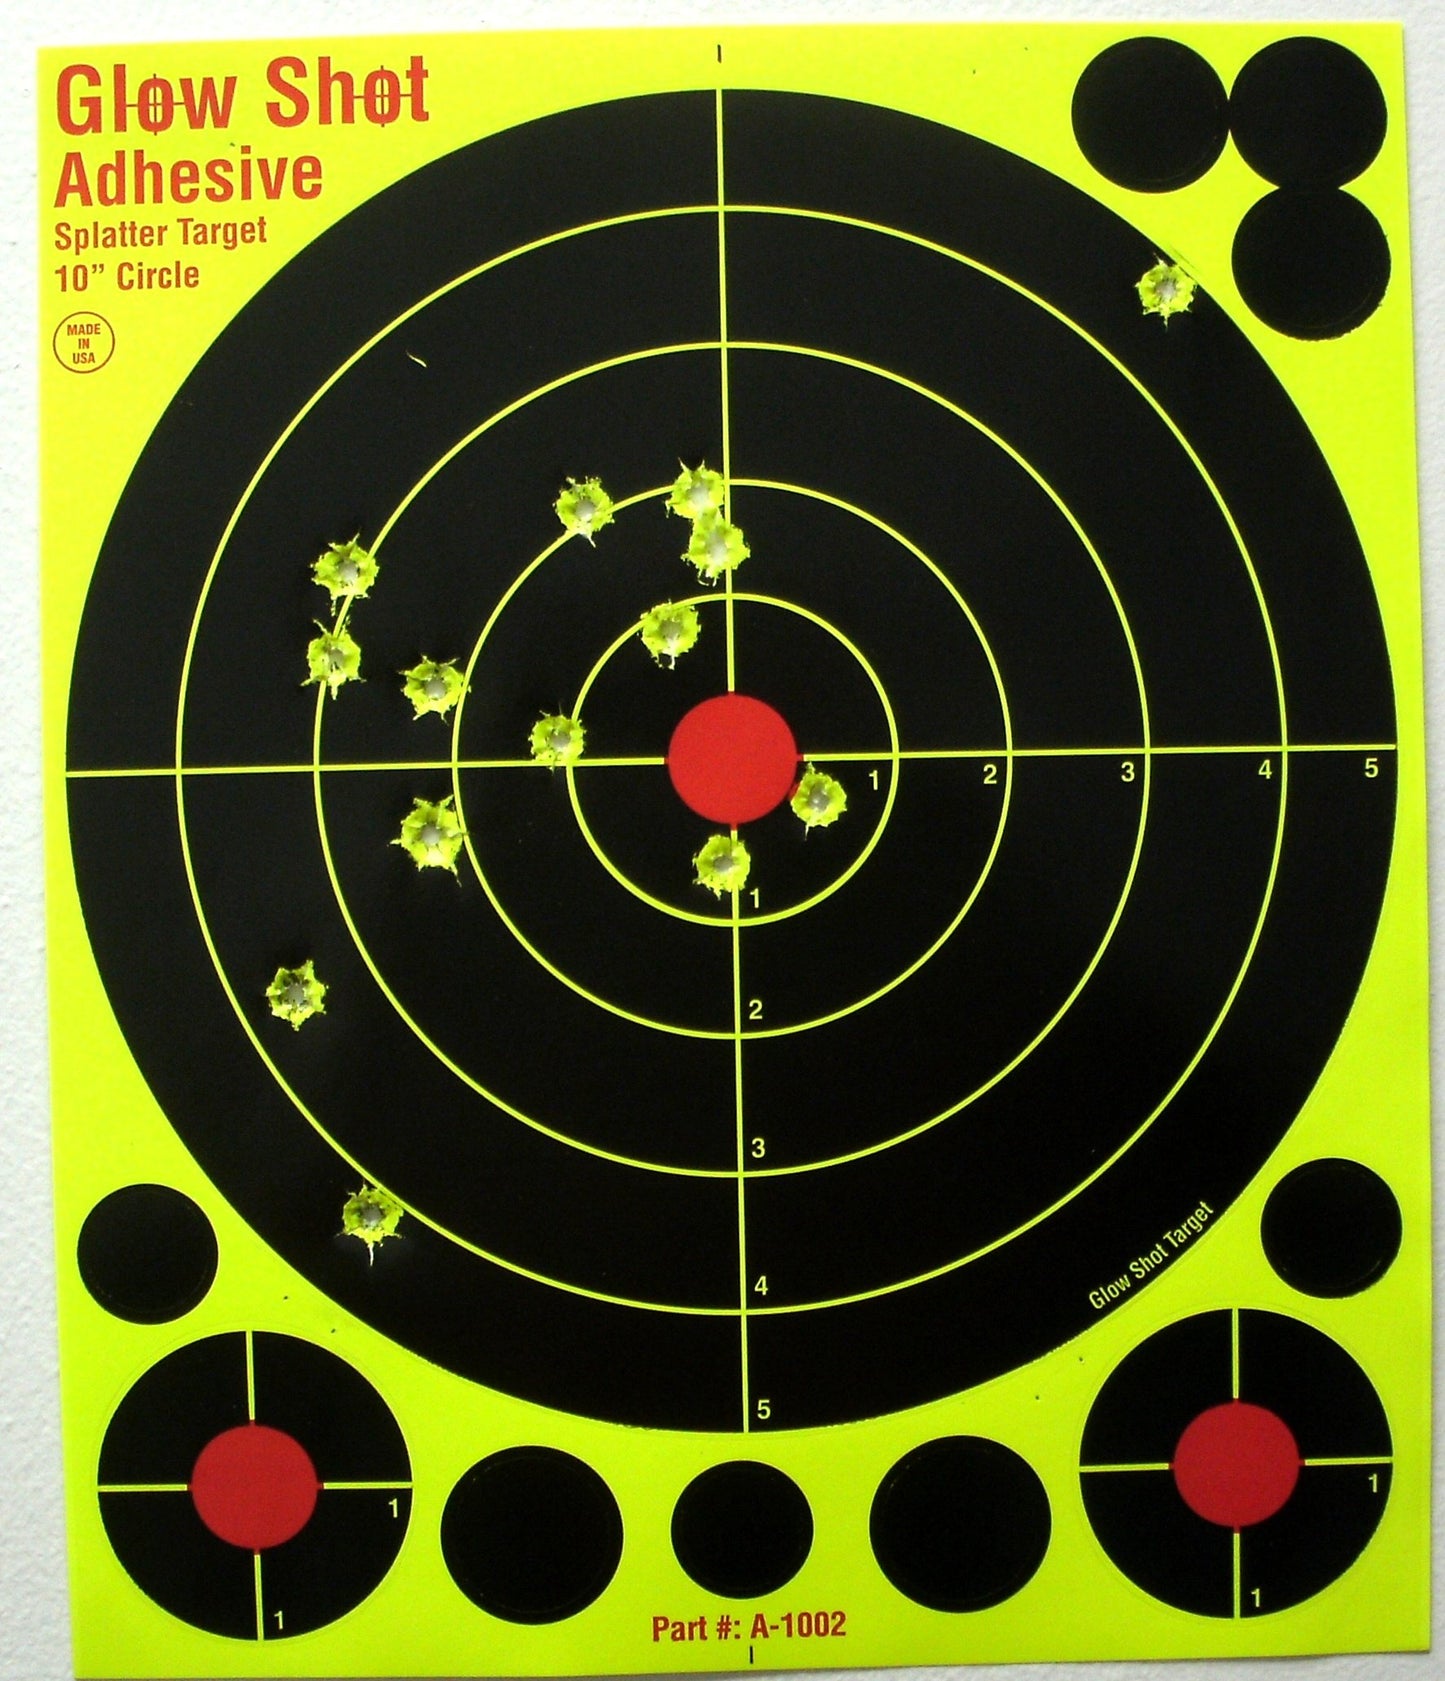 50 Pack - 10" Adhesive DayGo Reactive Splatter Targets - Glowshot - with 500 cover up patches - Opticdeals